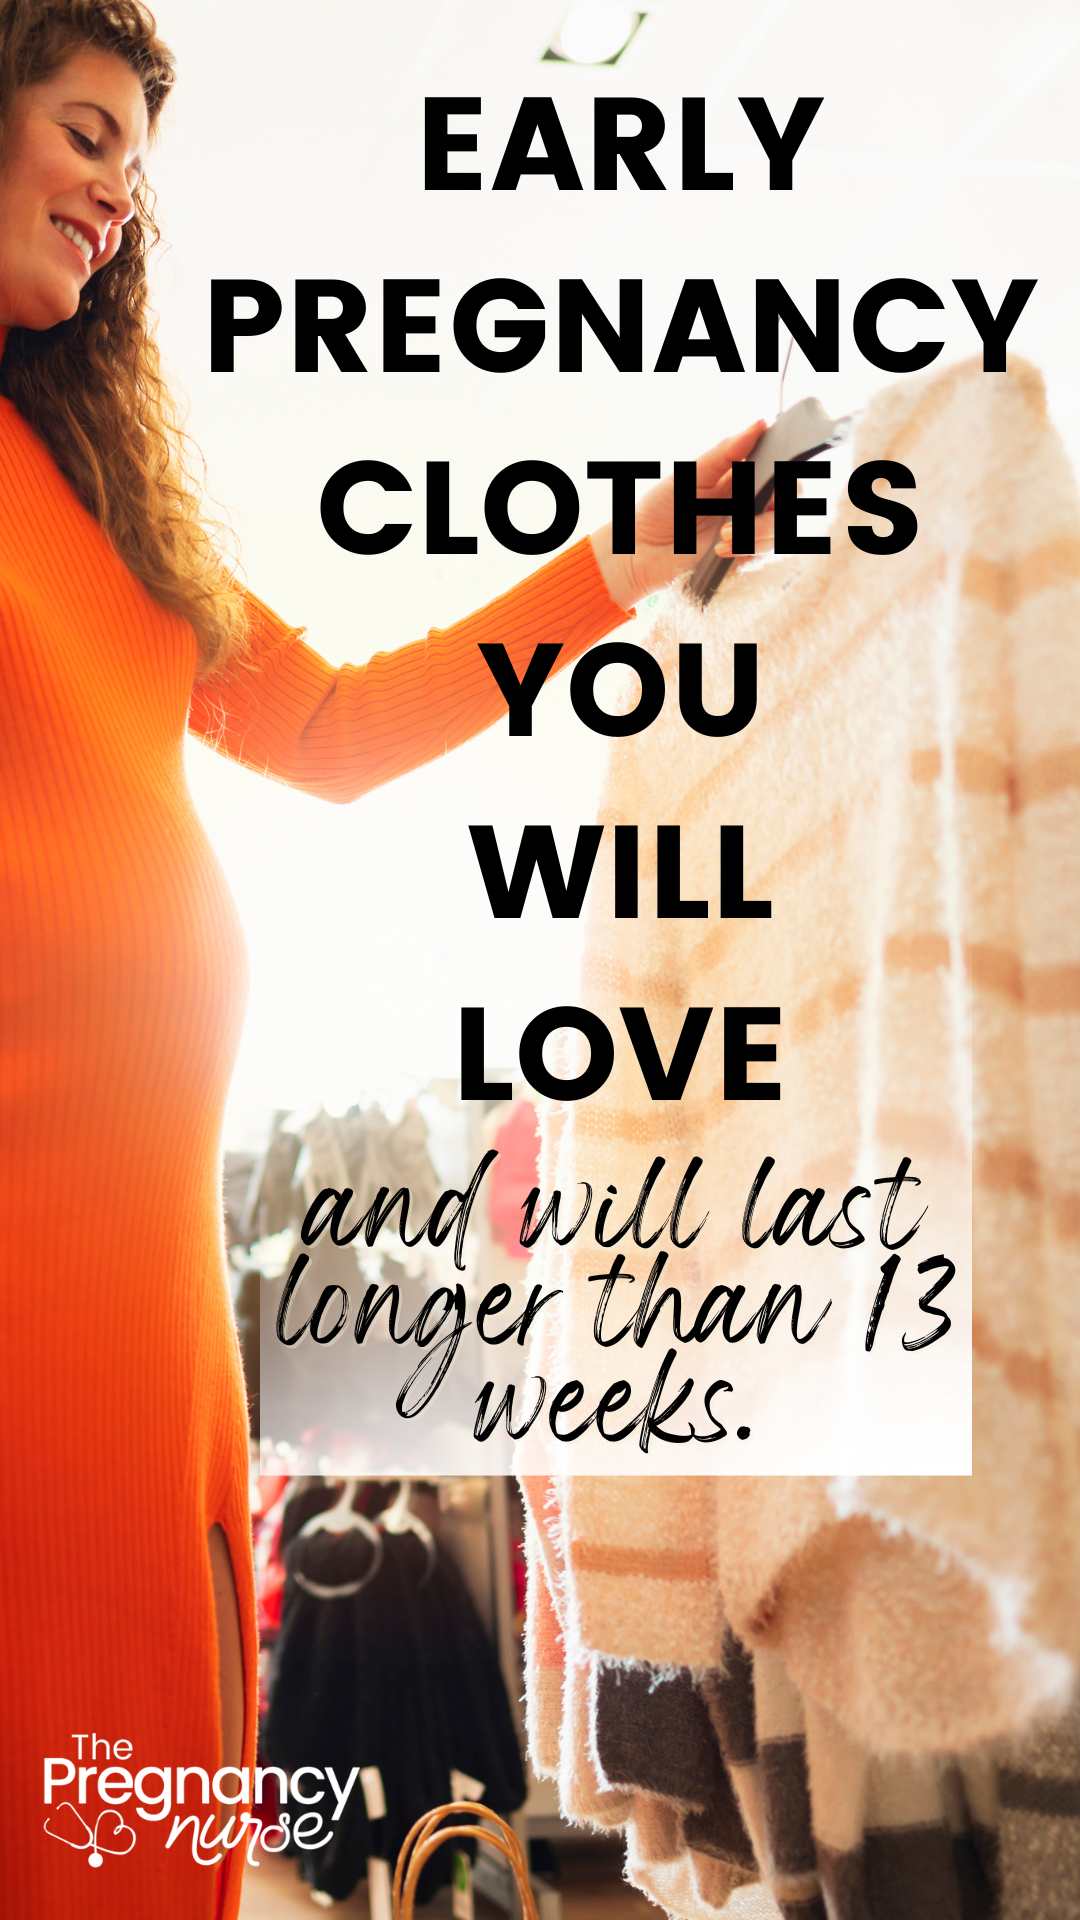 If you're in your first trimester, that bump may be growing. You want some stylish first trimester maternity clothes that are comfy, and hide that growing bump in early pregnancy.